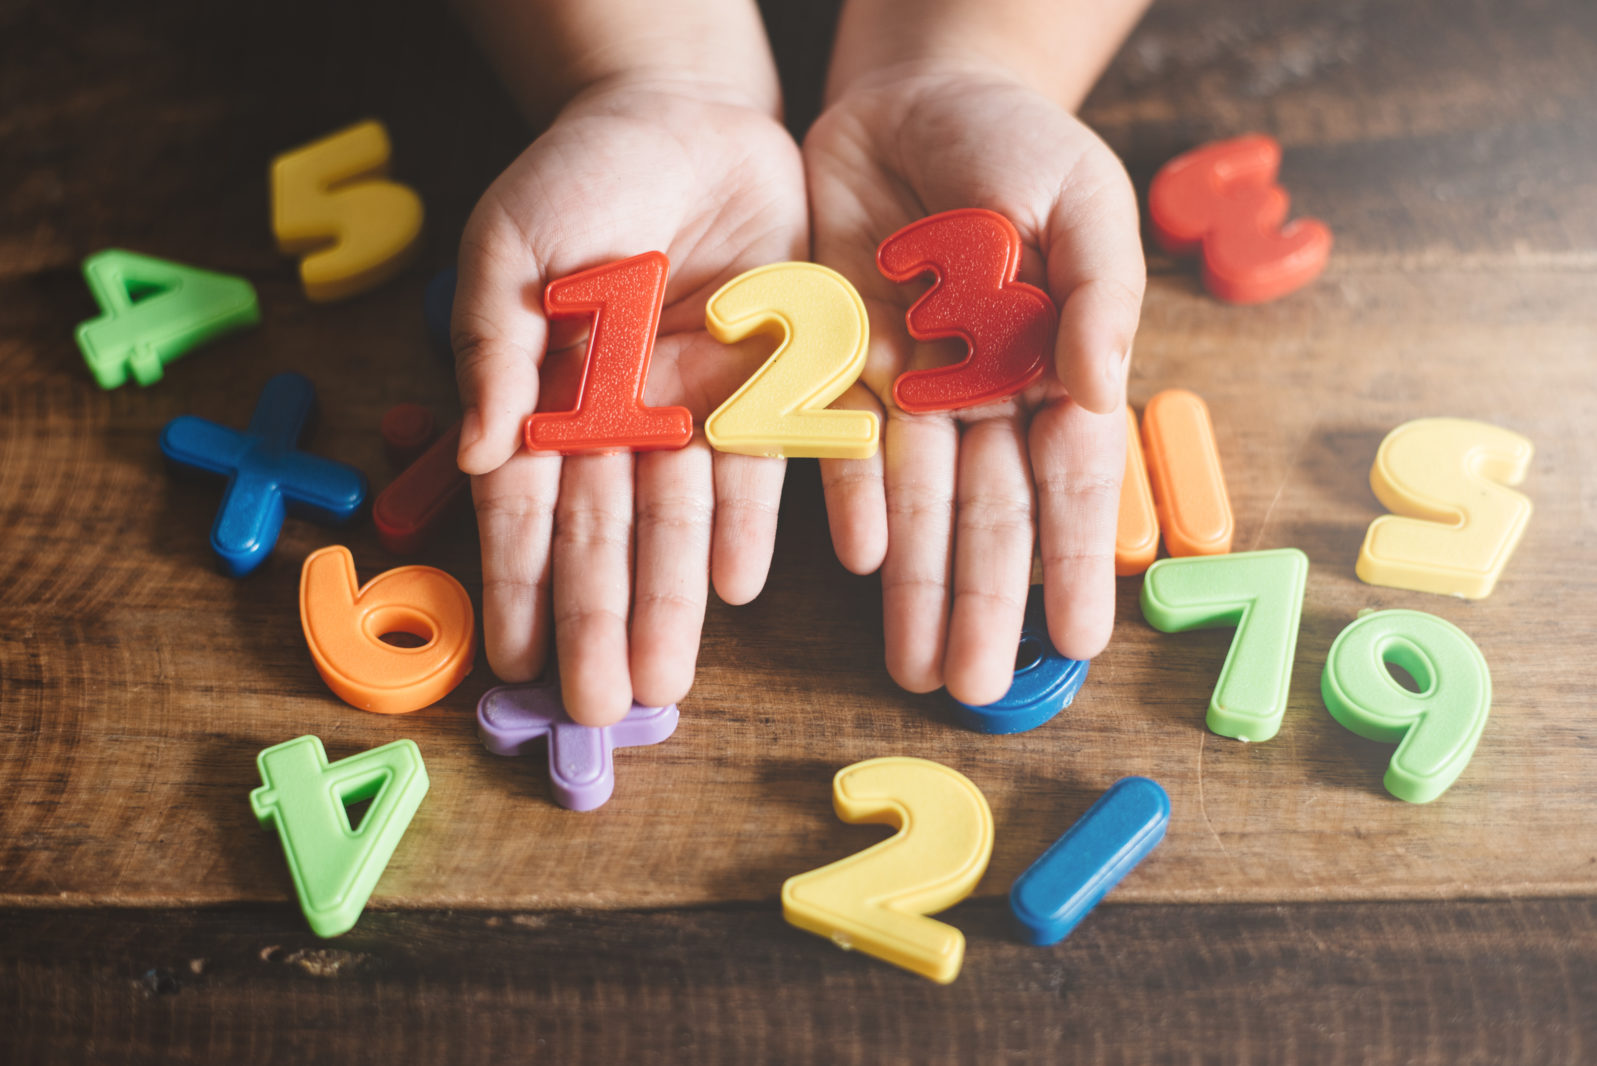 child hands showing a colorful 123 numbers agains wooden table. Concept of Child education, learning mathematics and counting